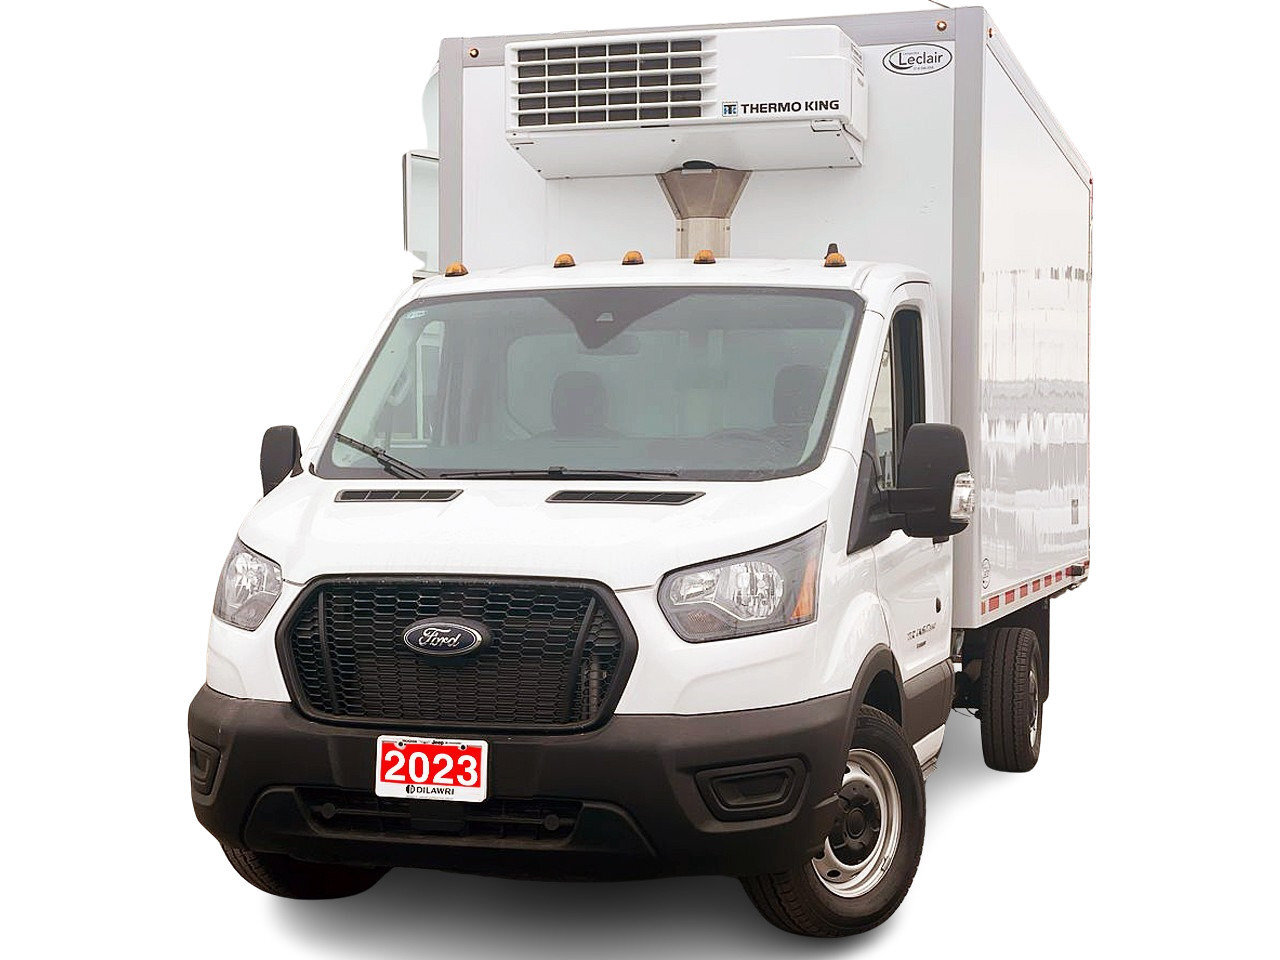 2023 Ford Transit 350HD Chassis T350hd 156wb DRW 14 Ft Leclair Box| Thermo King V-